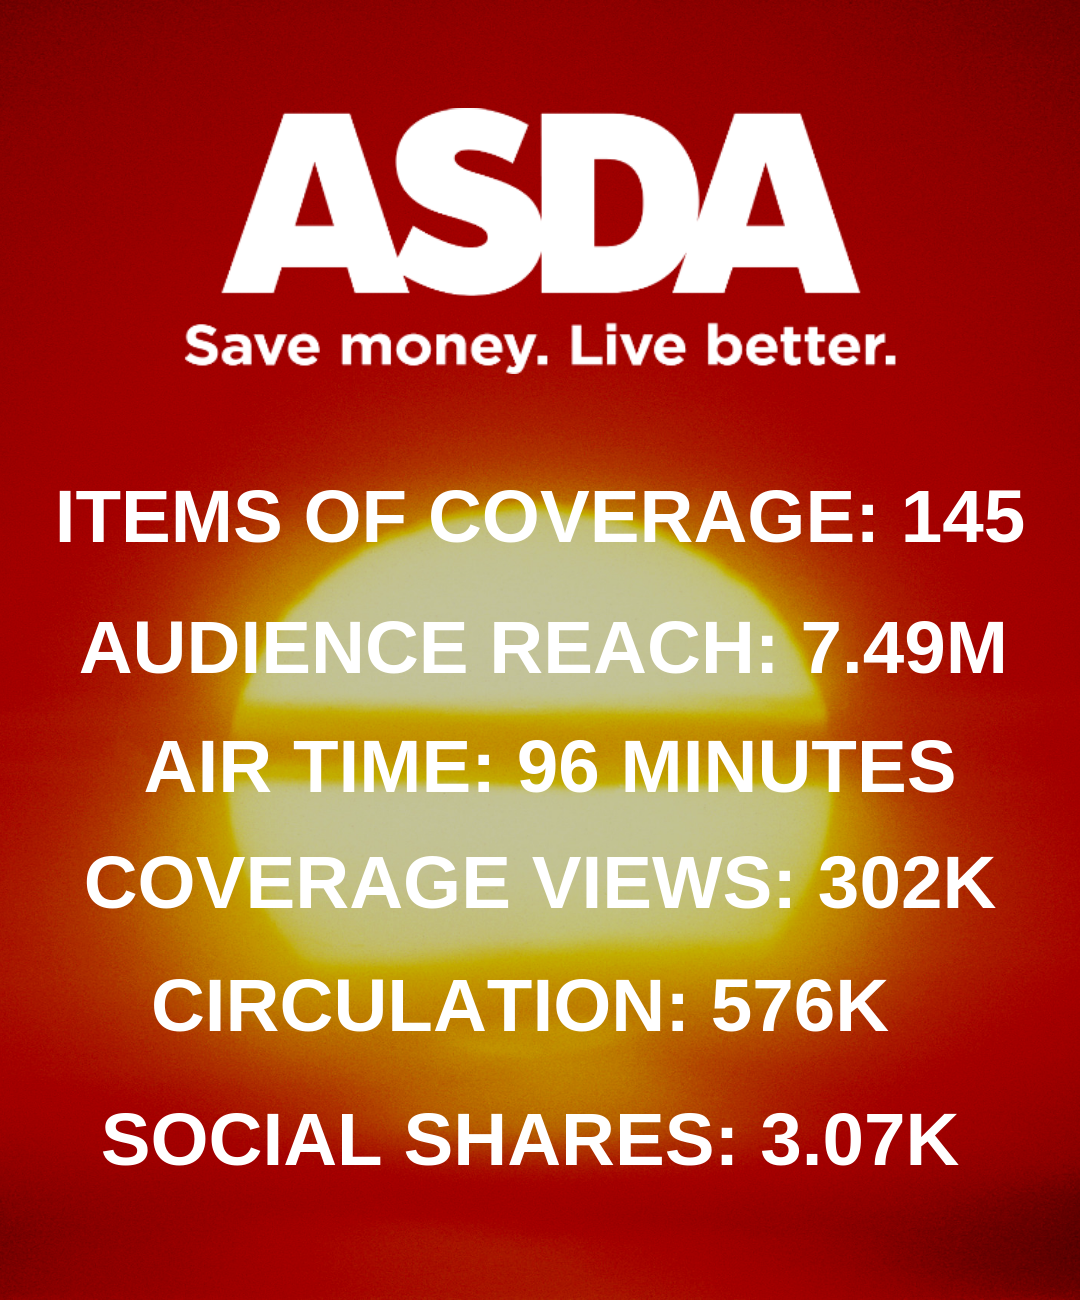 Campaign Stats from Asda Integrated Campaign